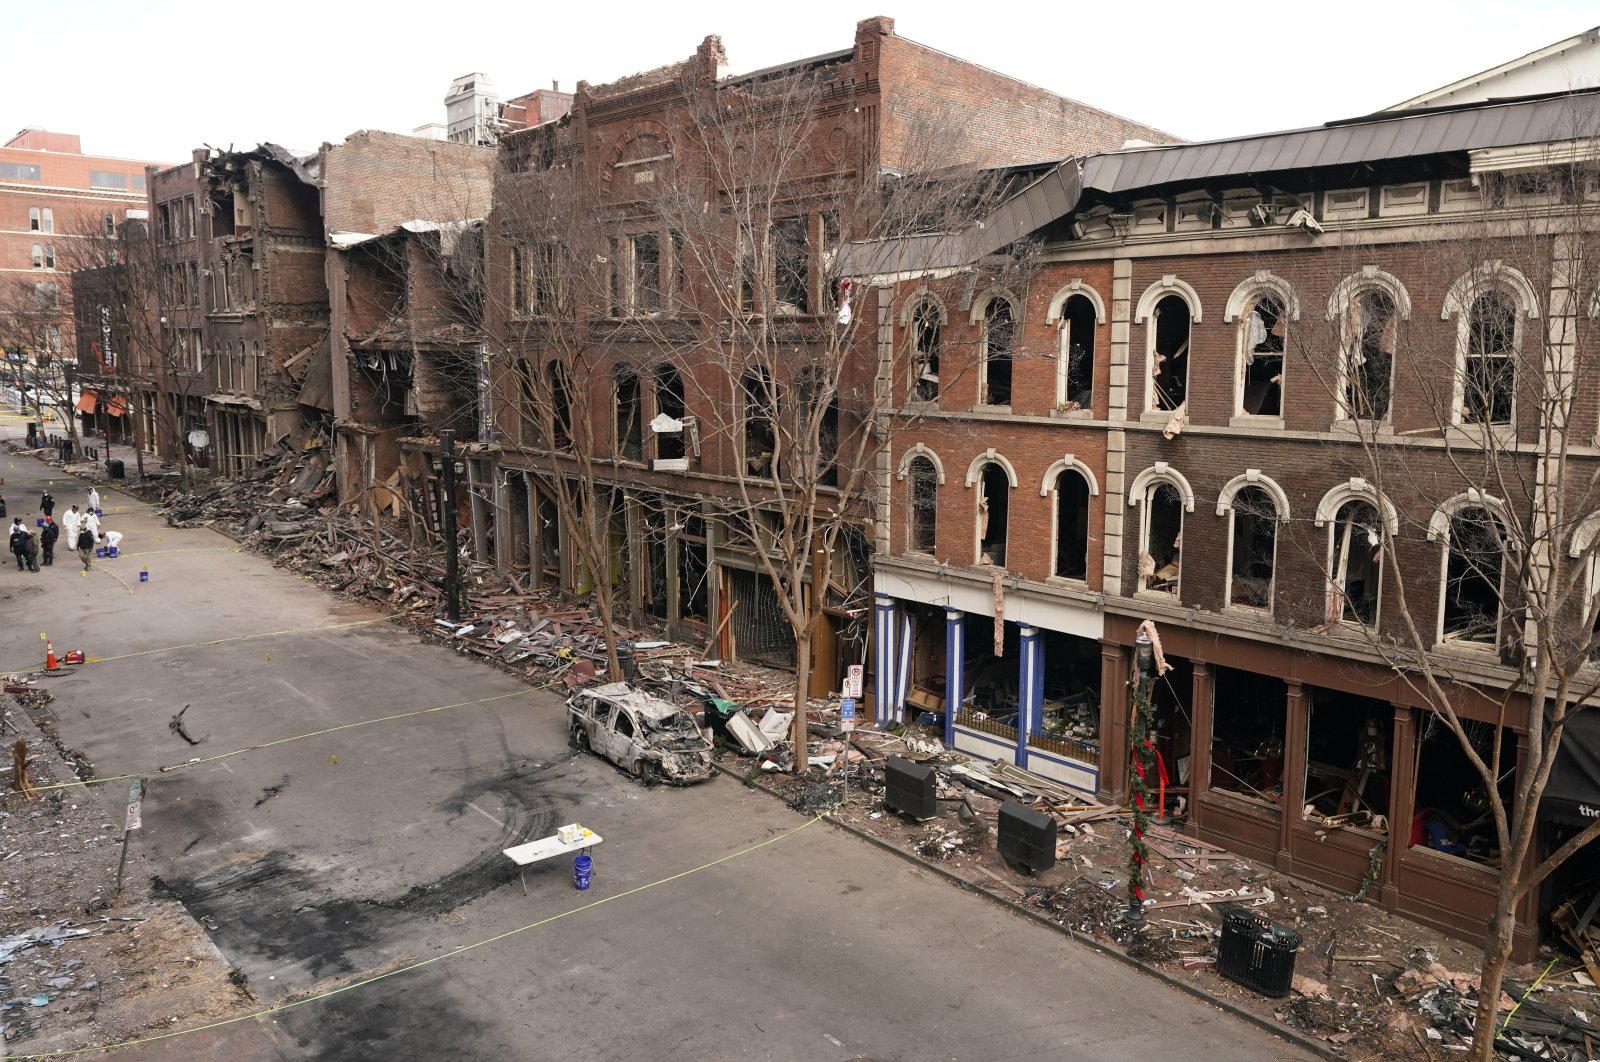 In this file photo, debris remains on the sidewalks in front of buildings damaged in a Christmas Day explosion in Nashville, Tennessee, Dec. 29, 2020. (AP Photo)